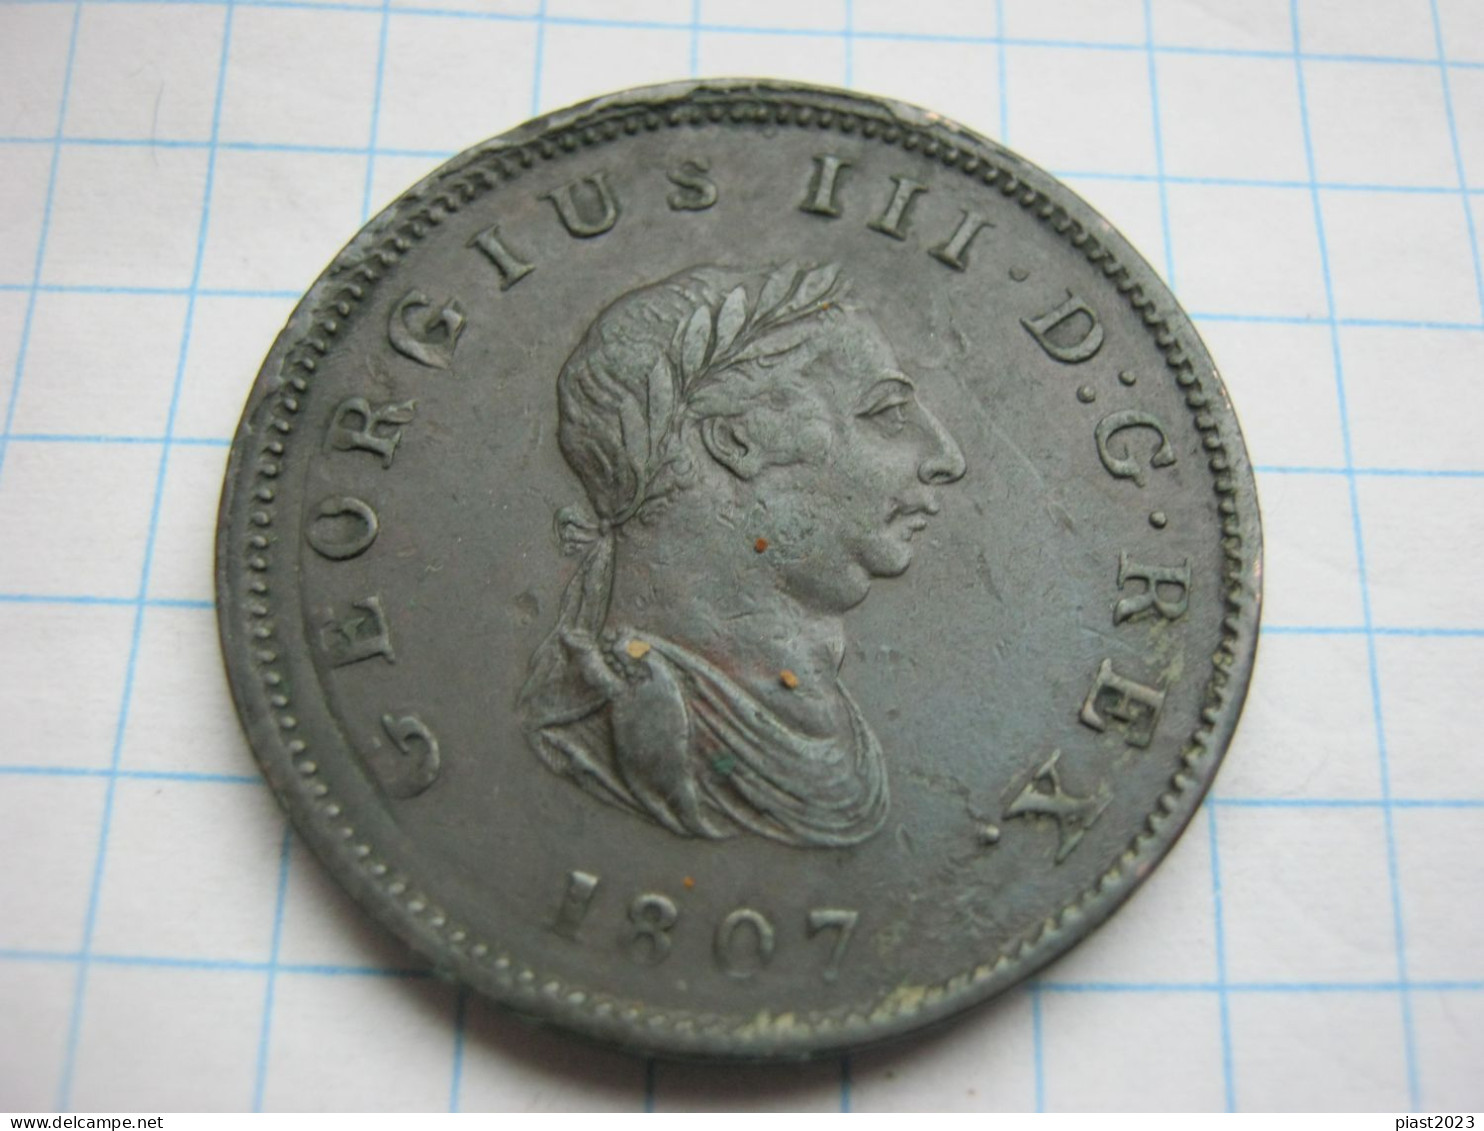 Great Britain 1/2 Penny 1807 - B. 1/2 Penny